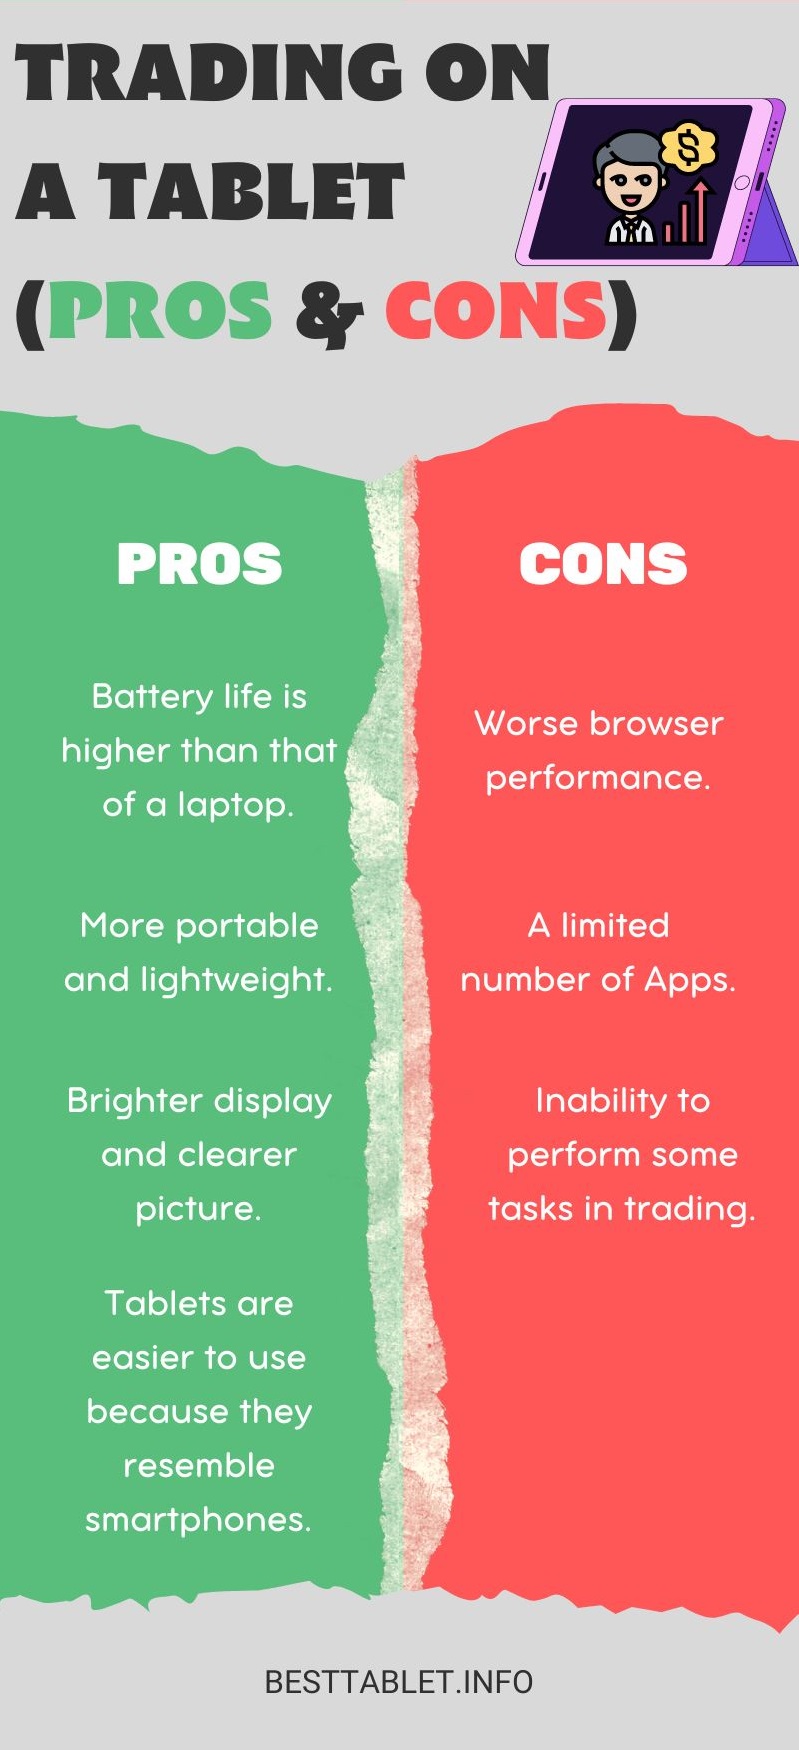 trading on a tablet pros and cons